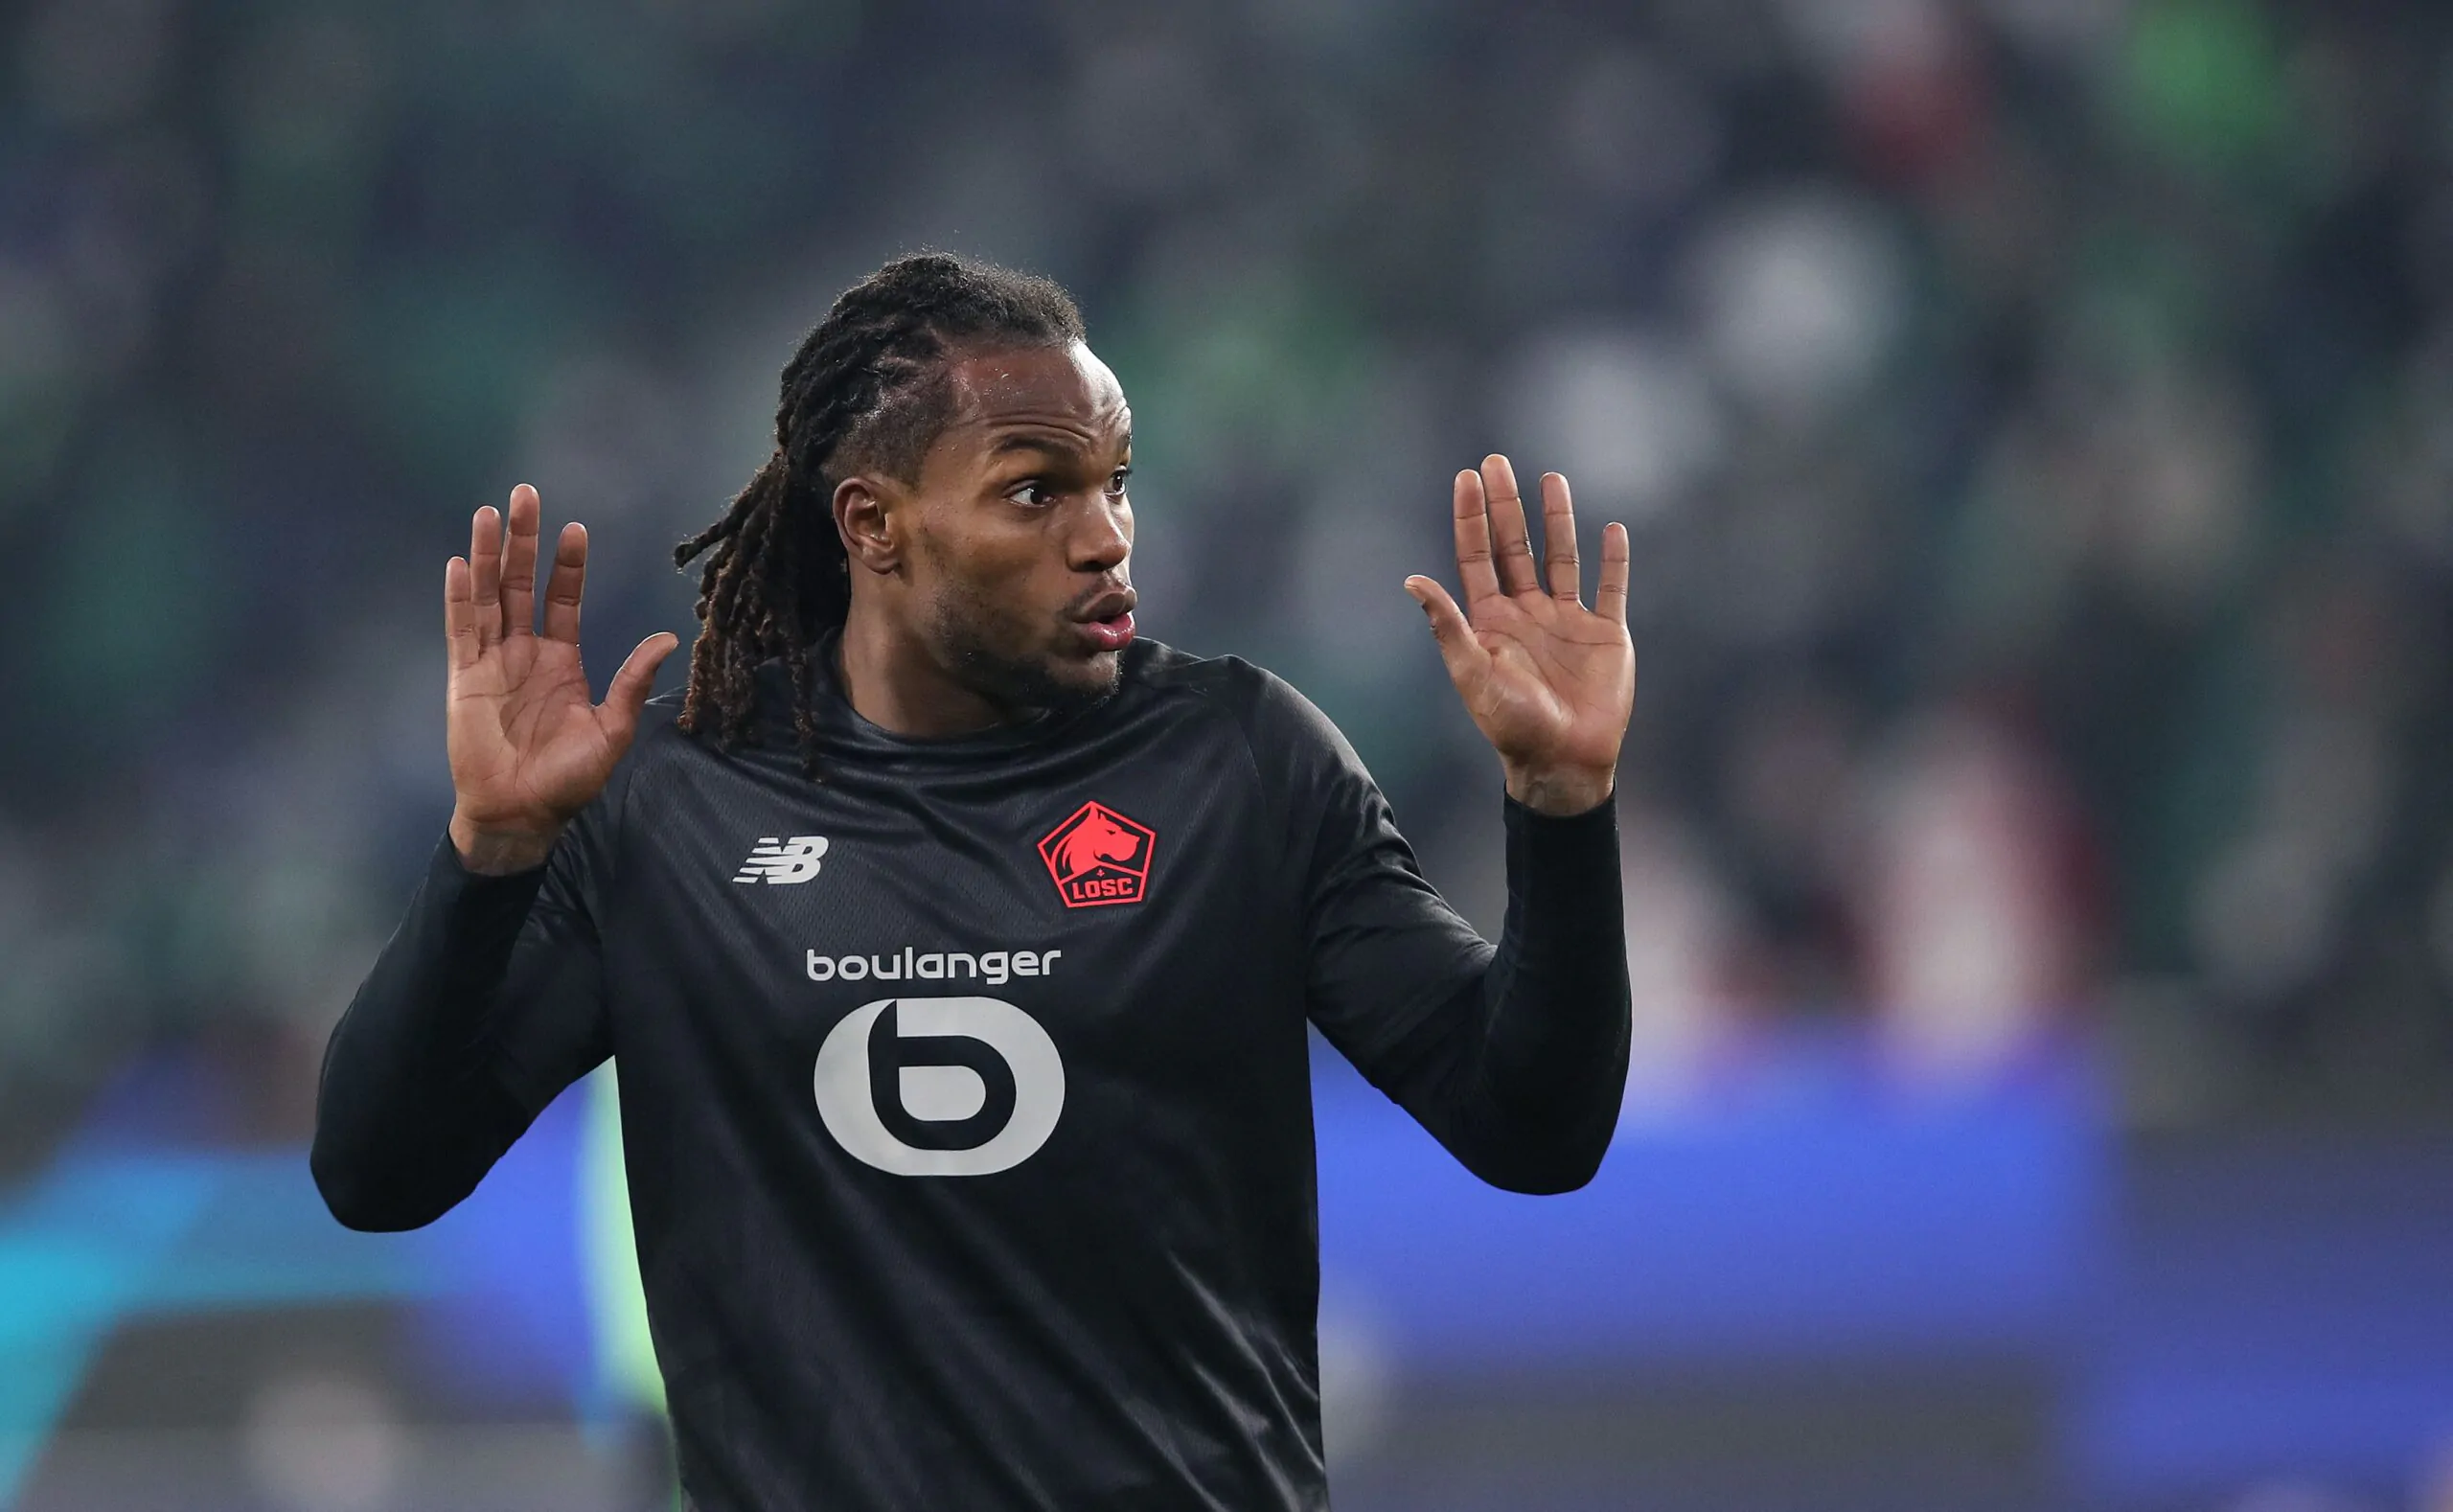 PSG seemed on the verge of winning the race for Renato Sanches, but they have not sealed the deal just yet, and Milan still believe to have a chance.